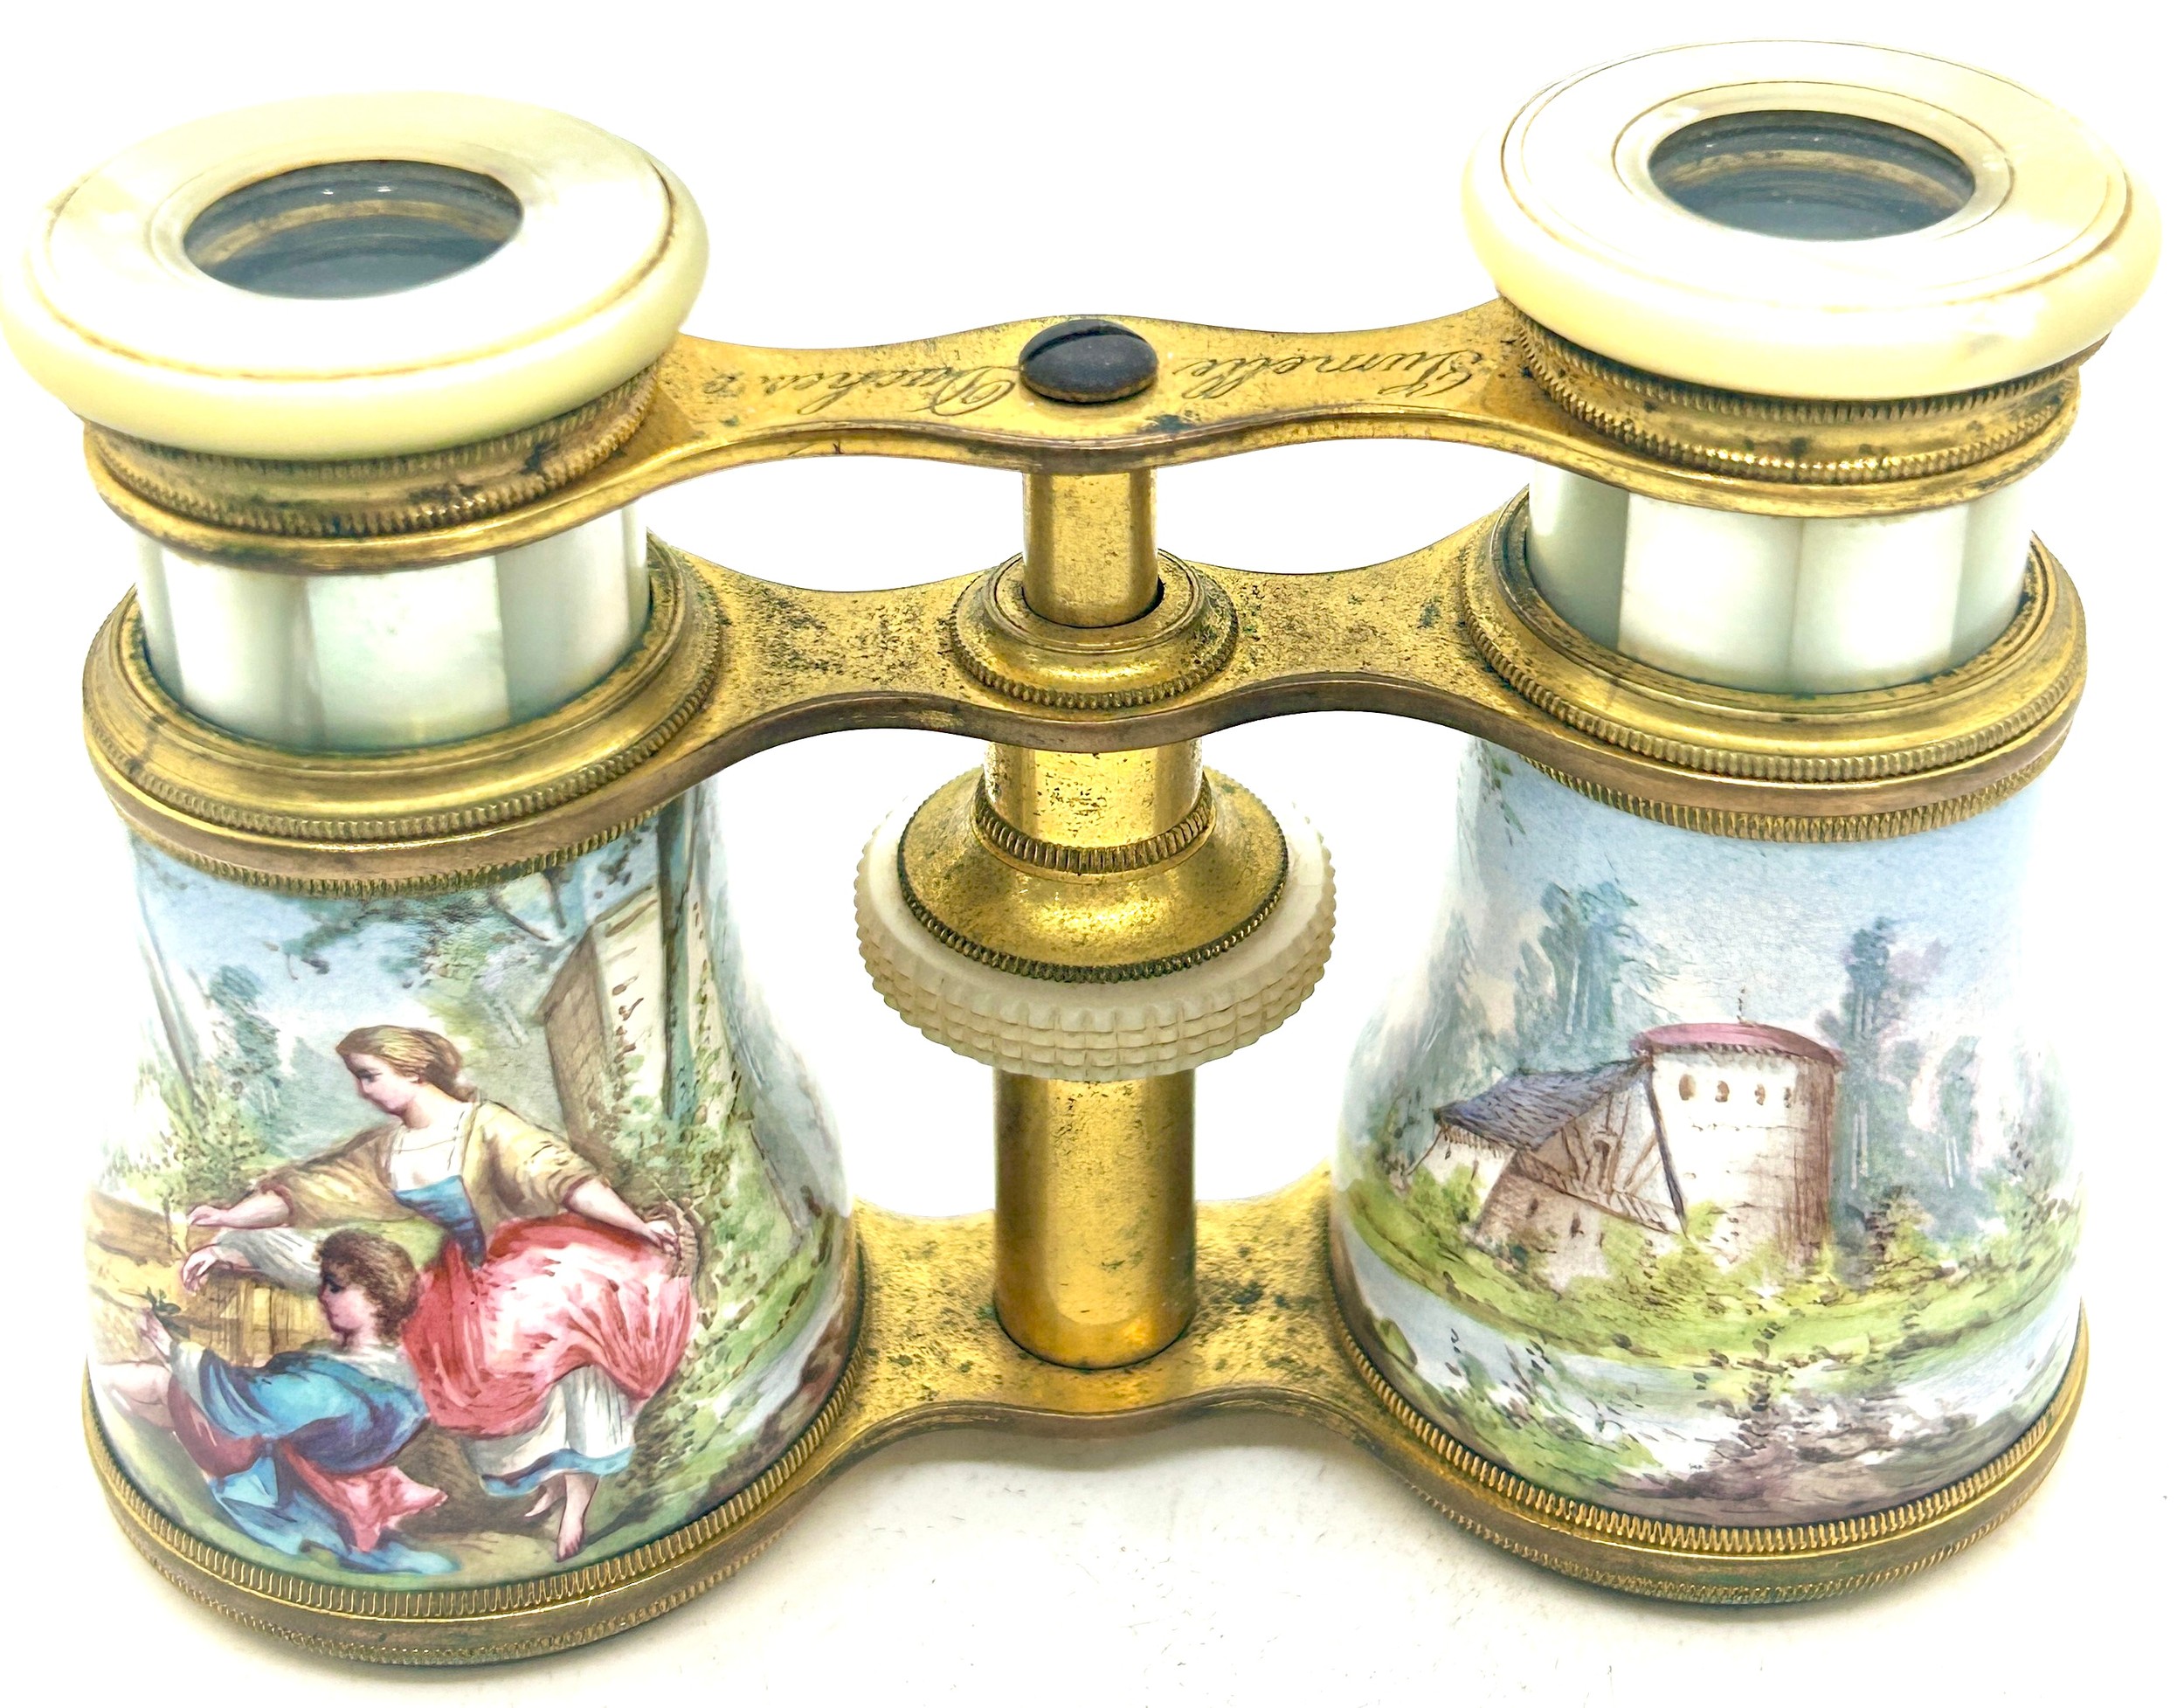 A pair of French gilt-brass and enamel opera glasses, late 19th century, with mother-of-pearl - Bild 5 aus 7